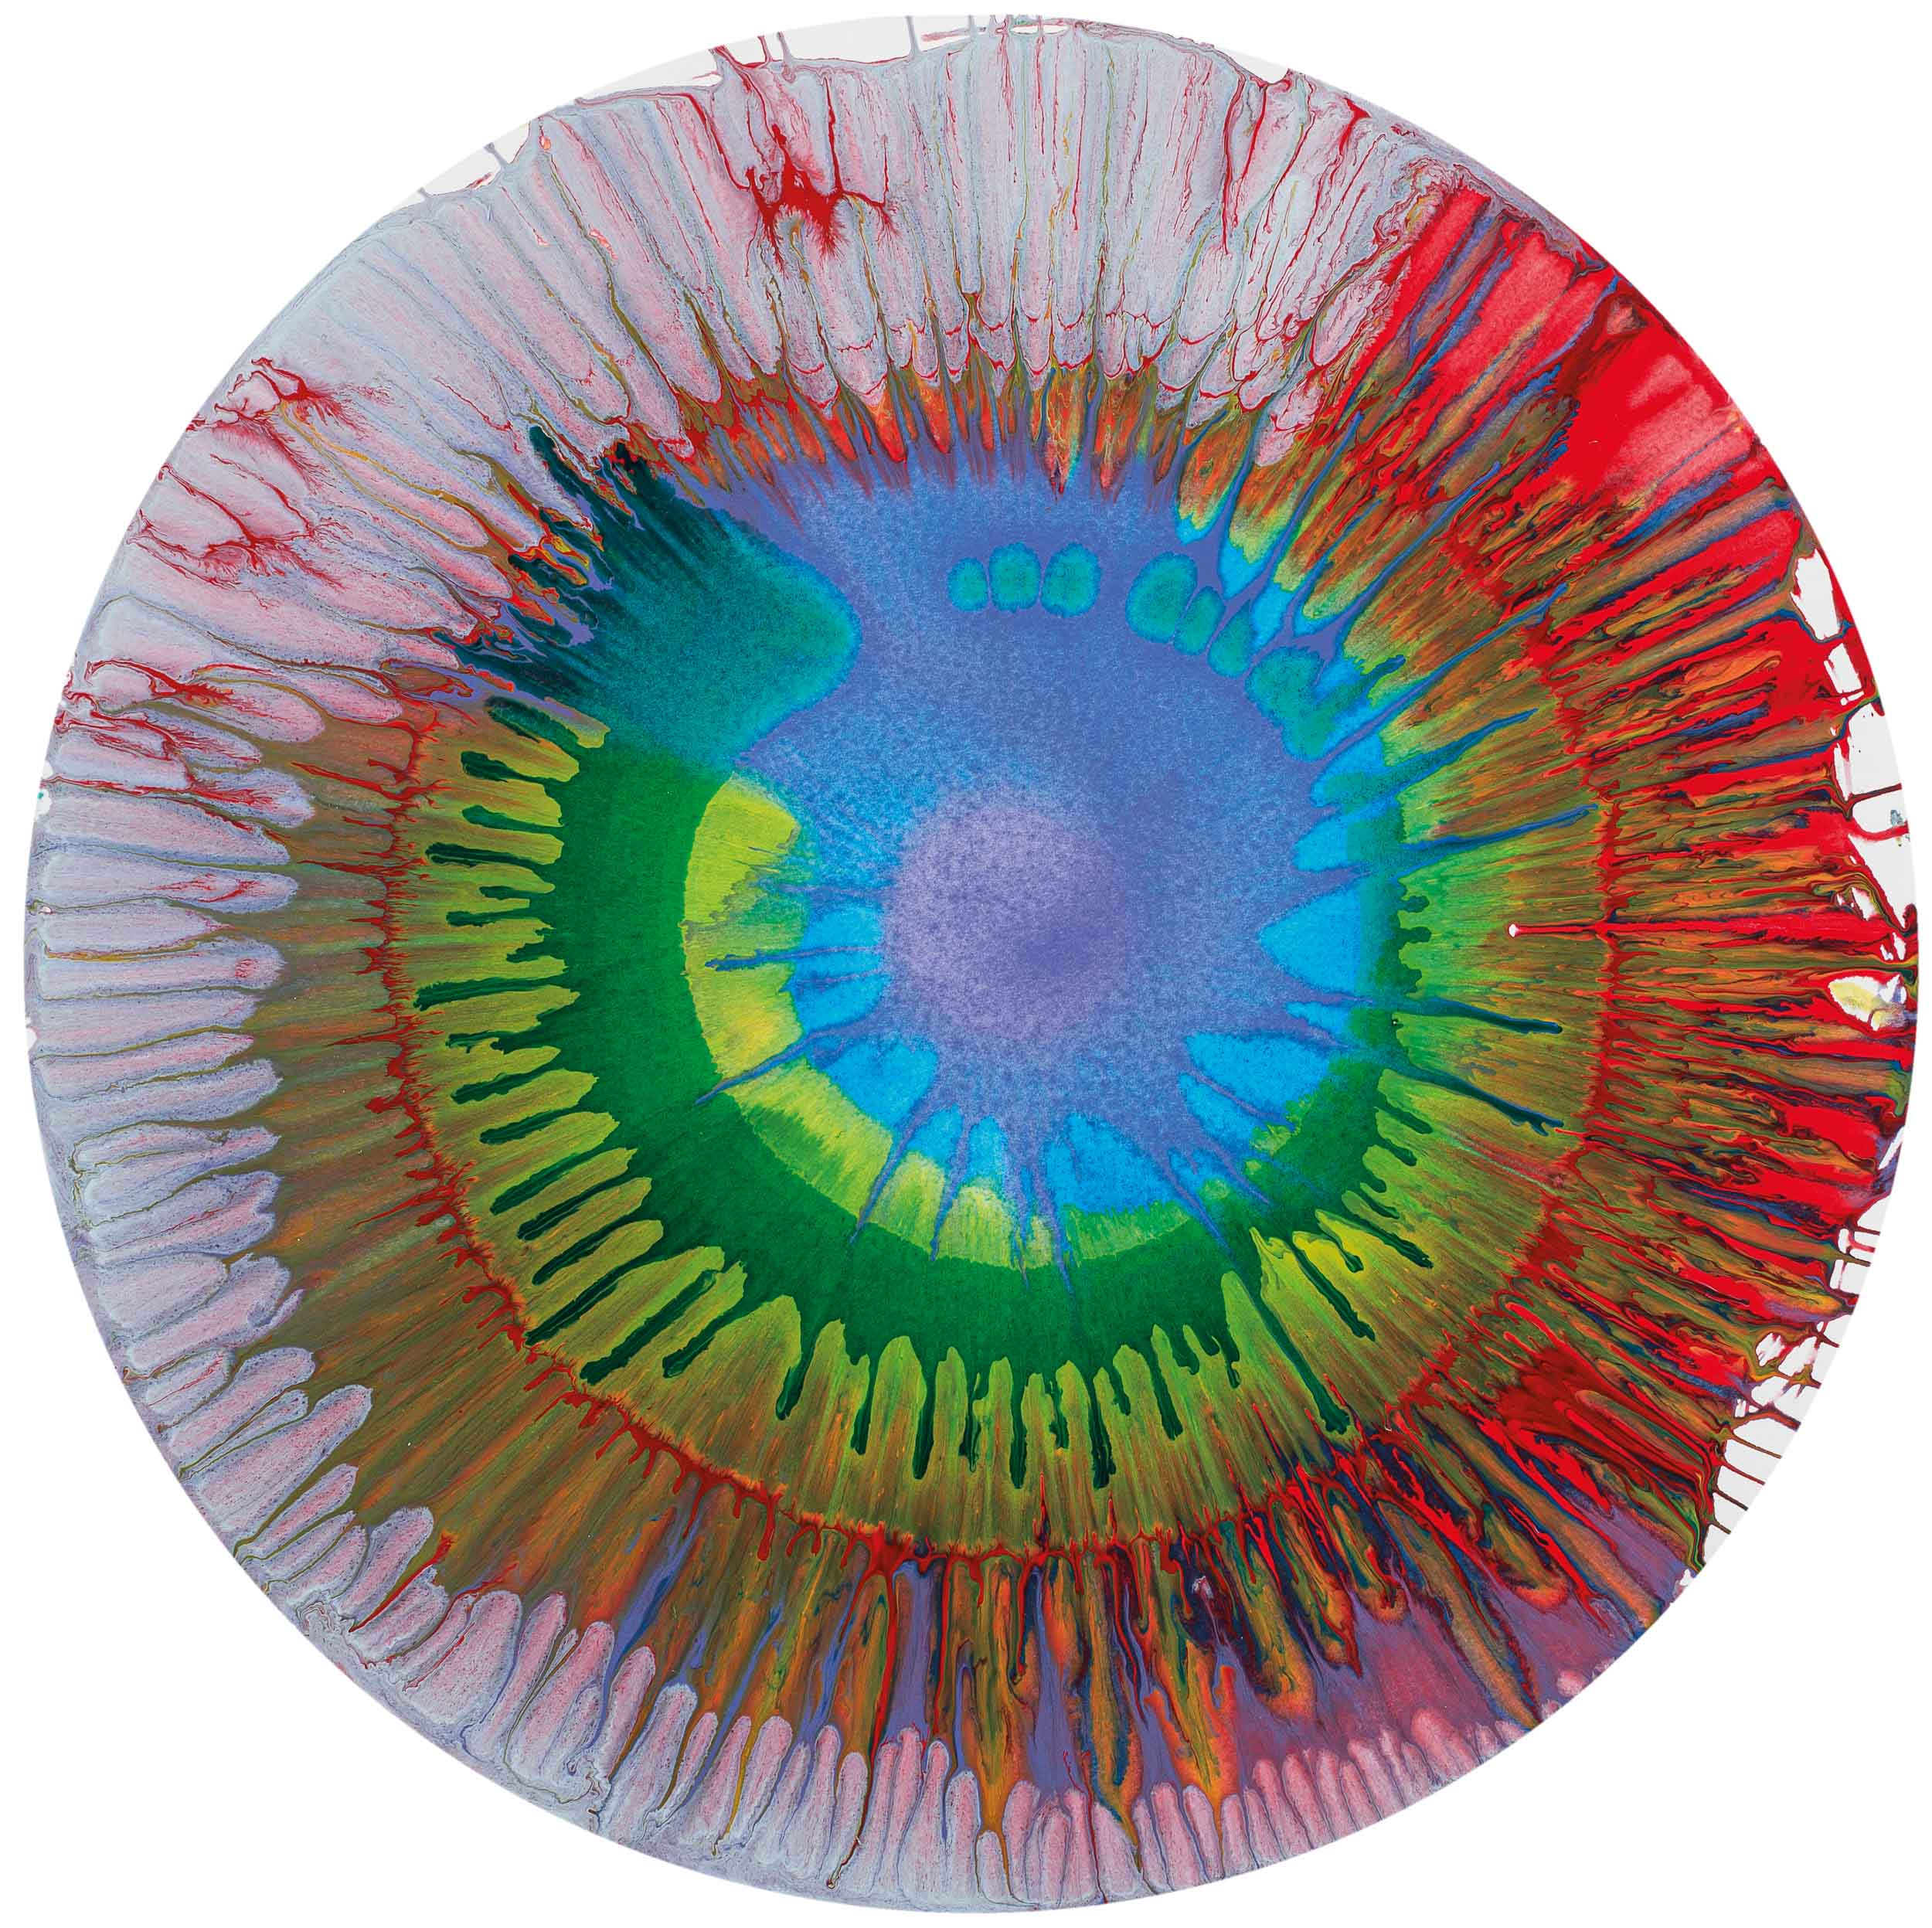 Spin Painting (2009)